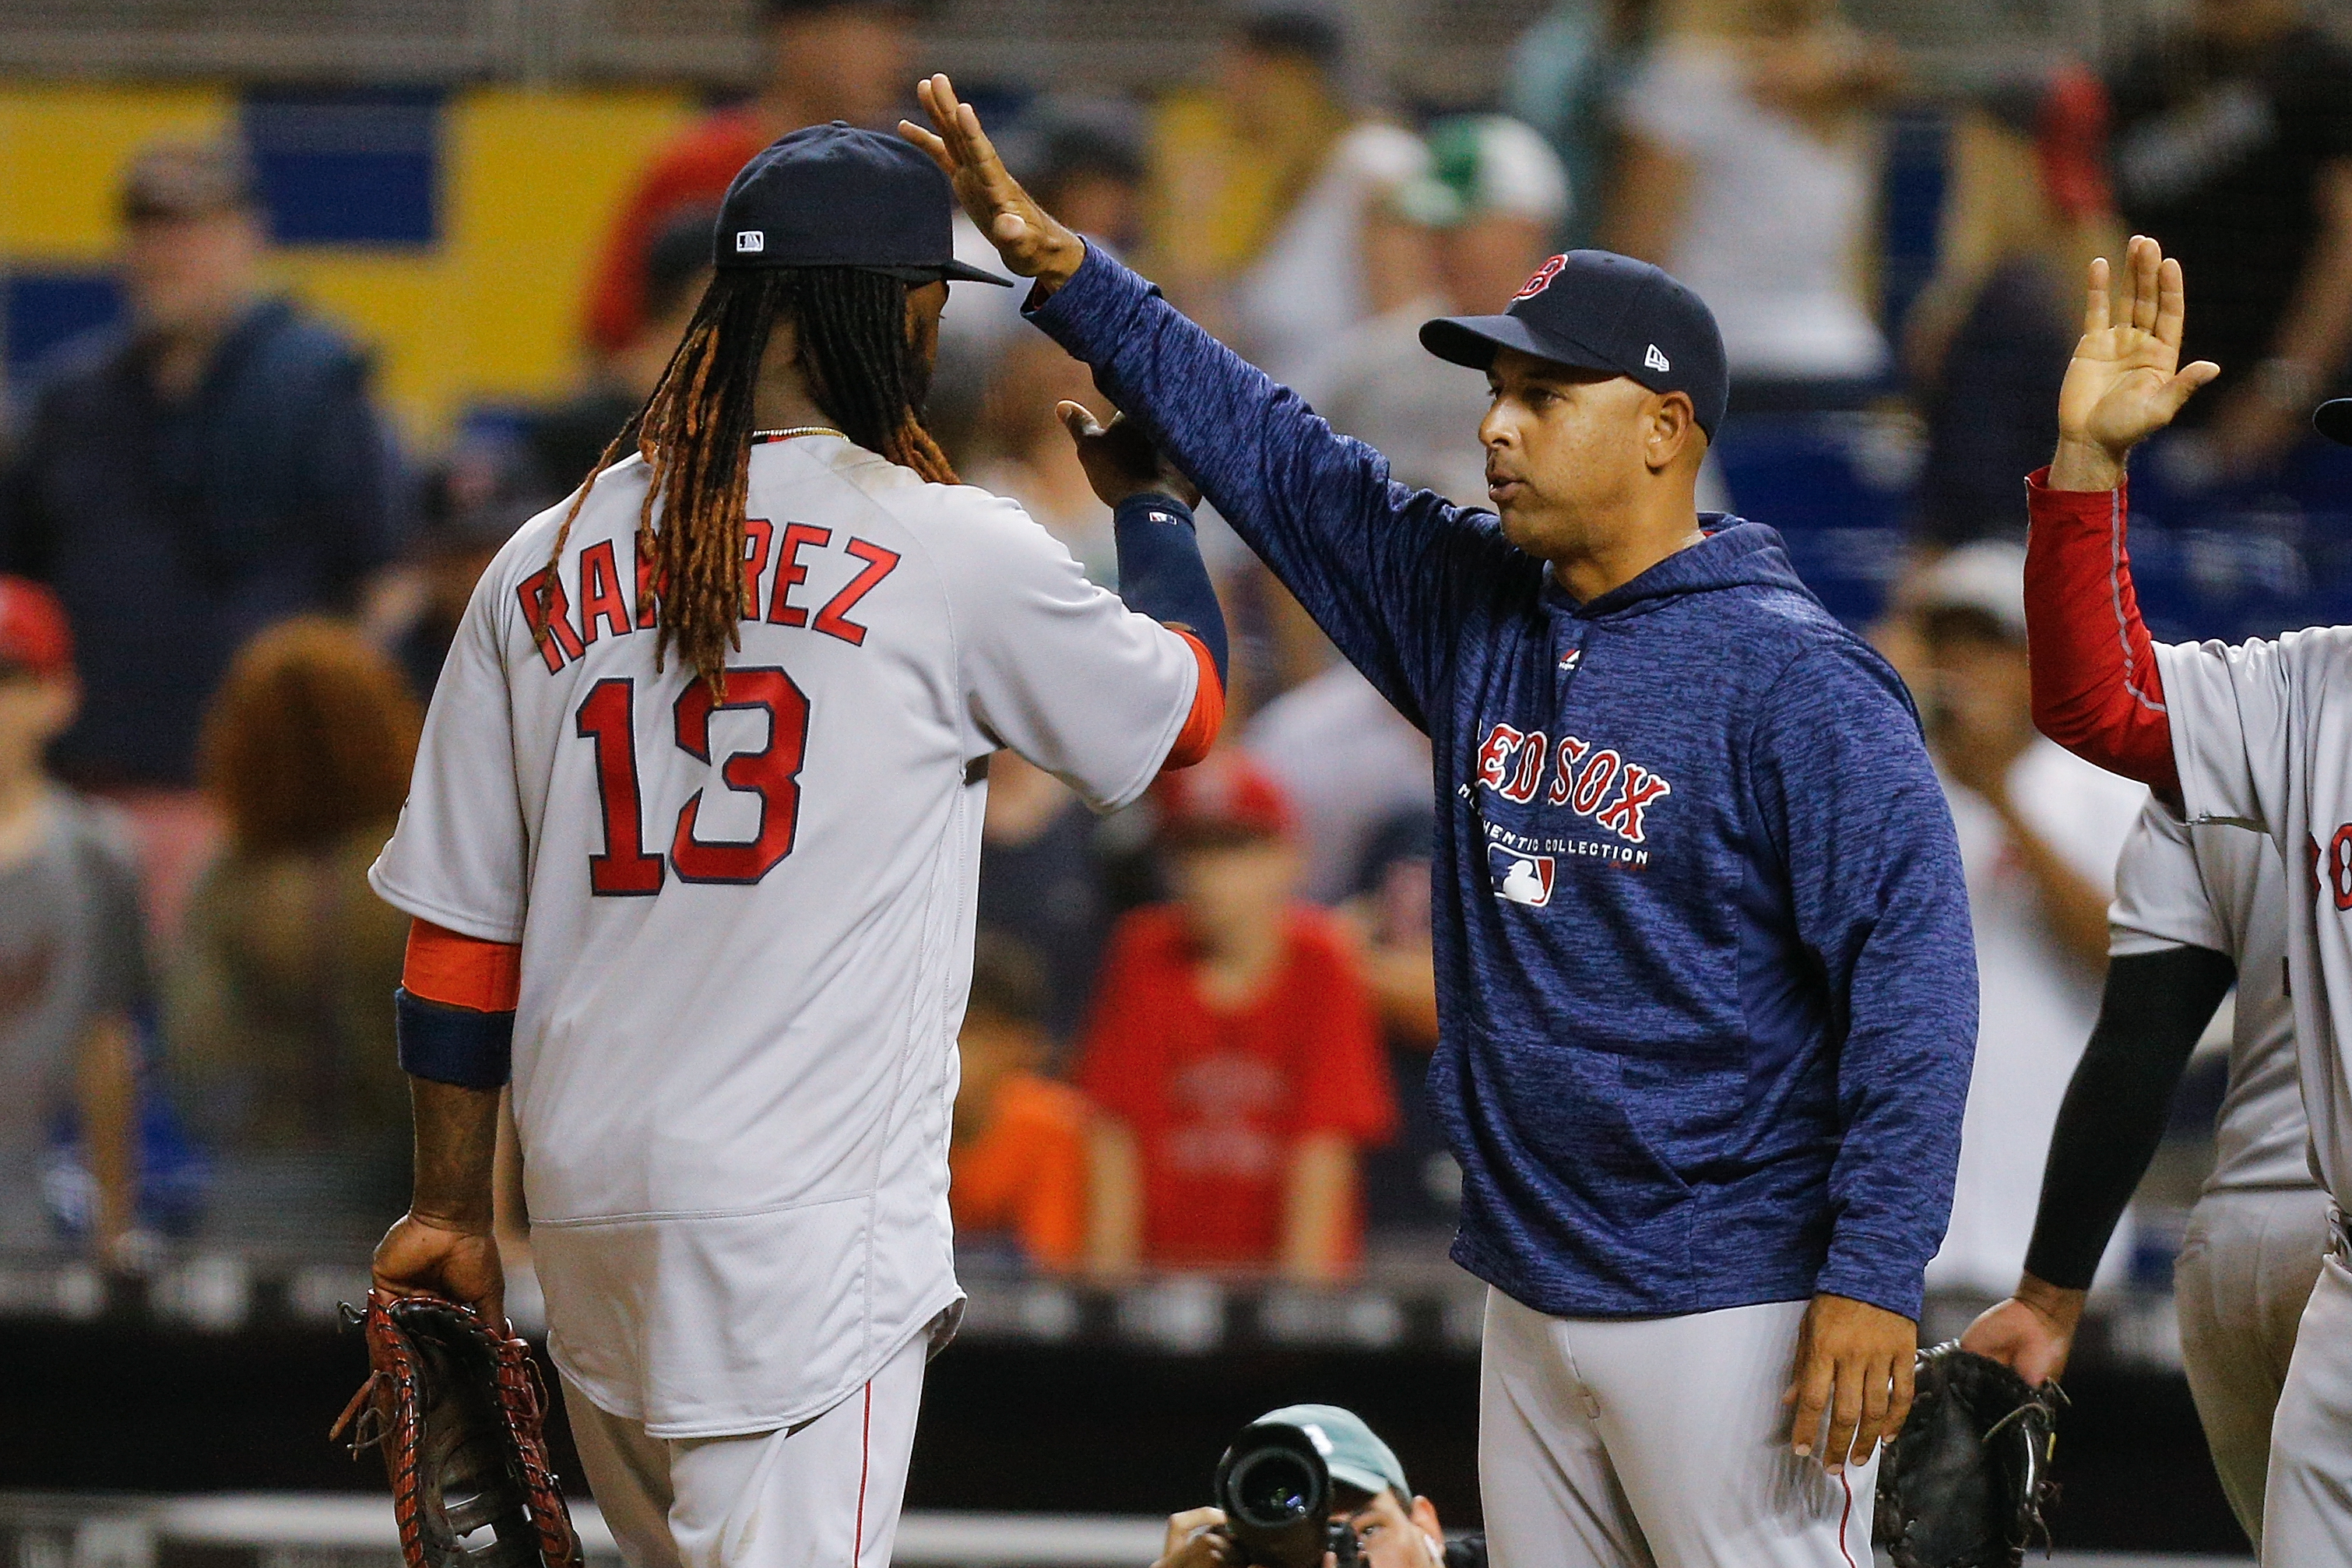 Red Sox designate Hanley Ramirez for assignment so they can save $22 million